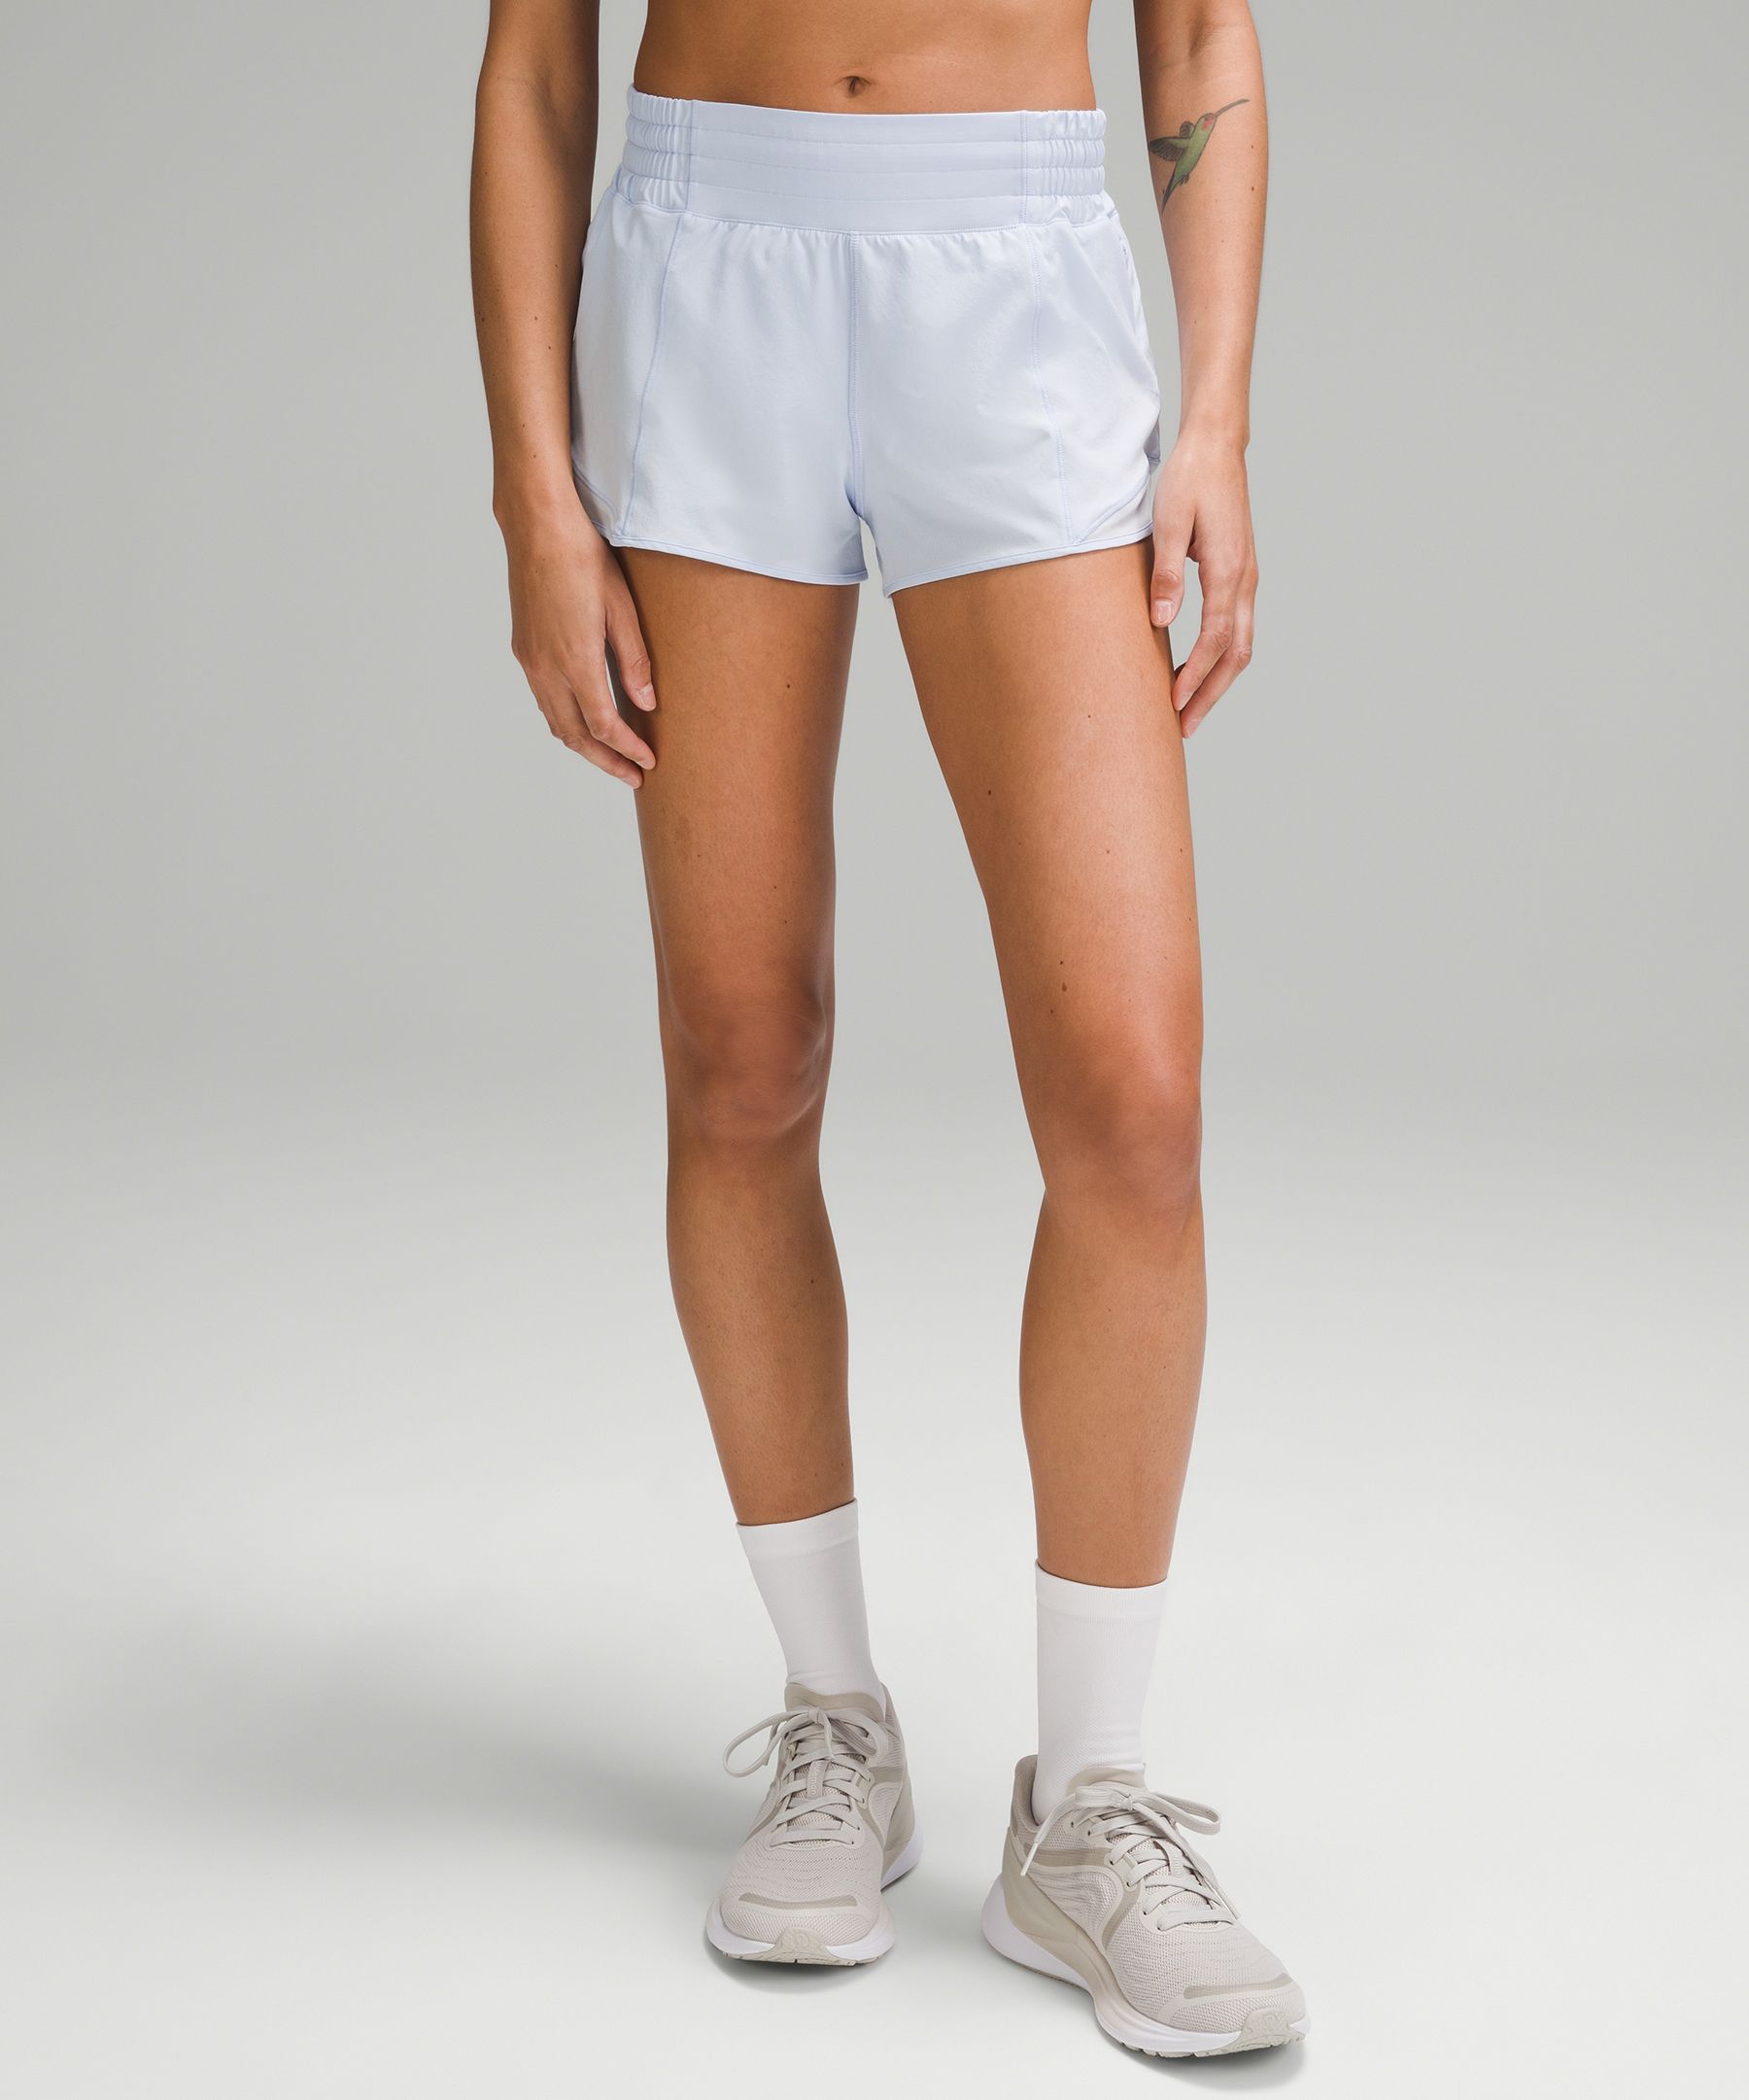 Black light touch shorts total look